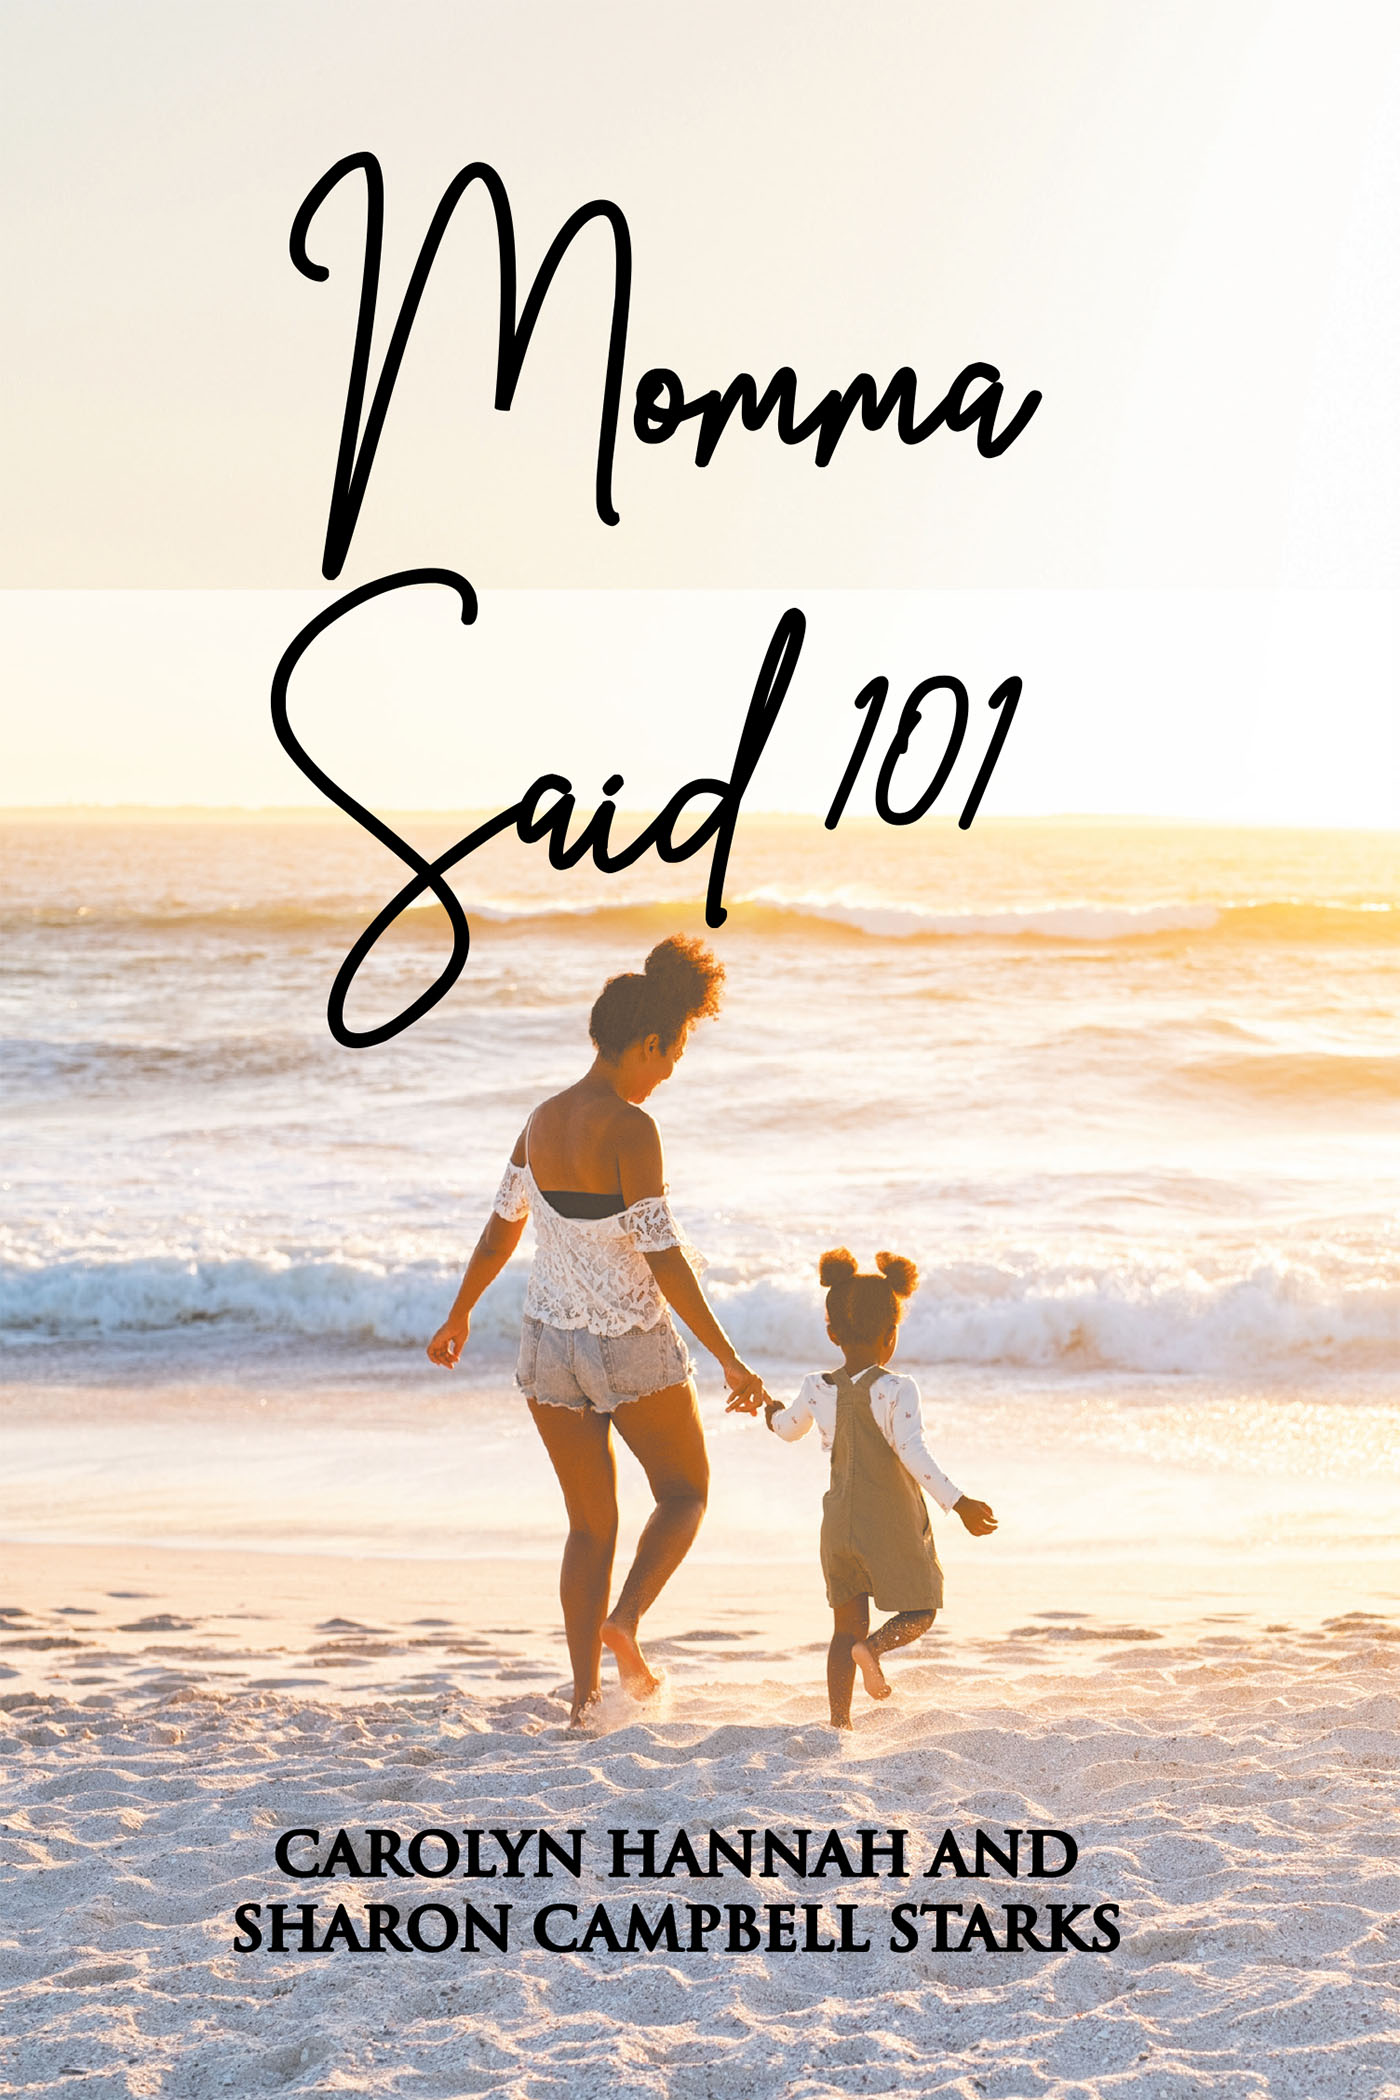 Carolyn Hannah and Sharon Campbell Starks’s Newly Released "Momma Said 101" is a Collection of Insightful Phrases and Related Scripture